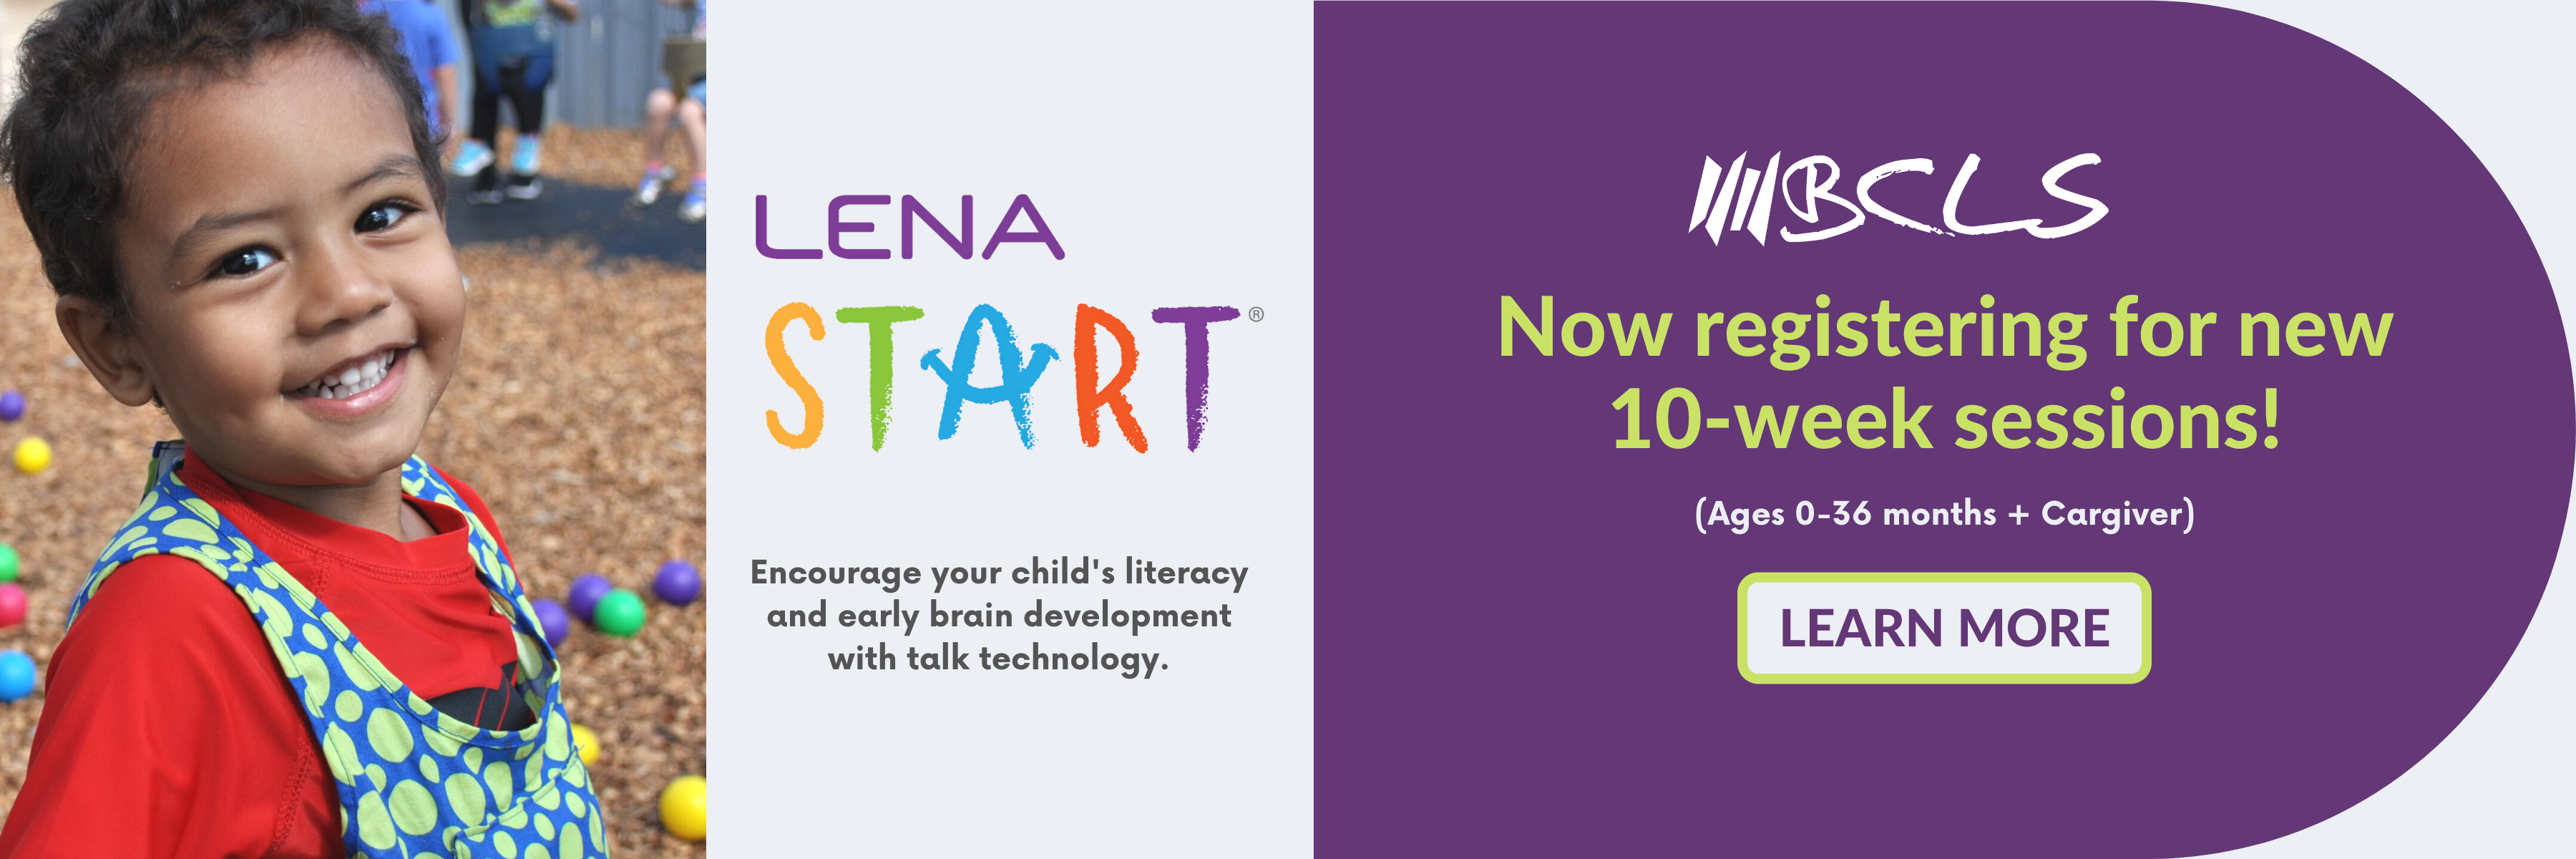 Now registering for 10-week LENA Start classes for babies, toddlers and caregivers